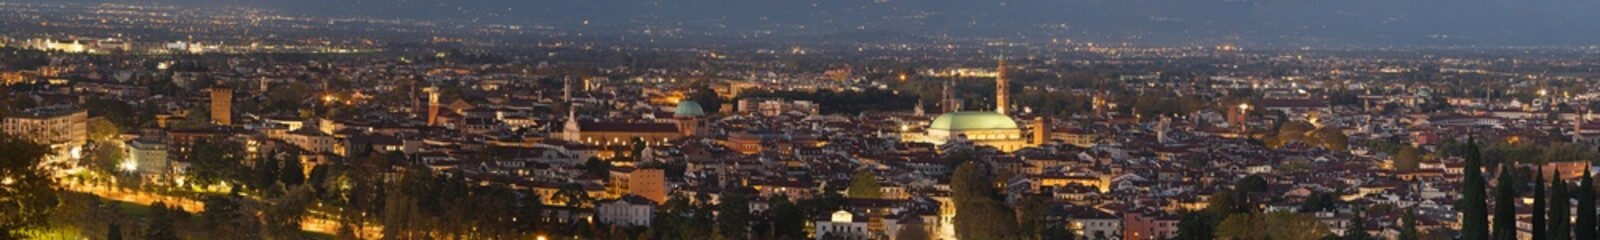 The cityscape of Vicenza at dusk.